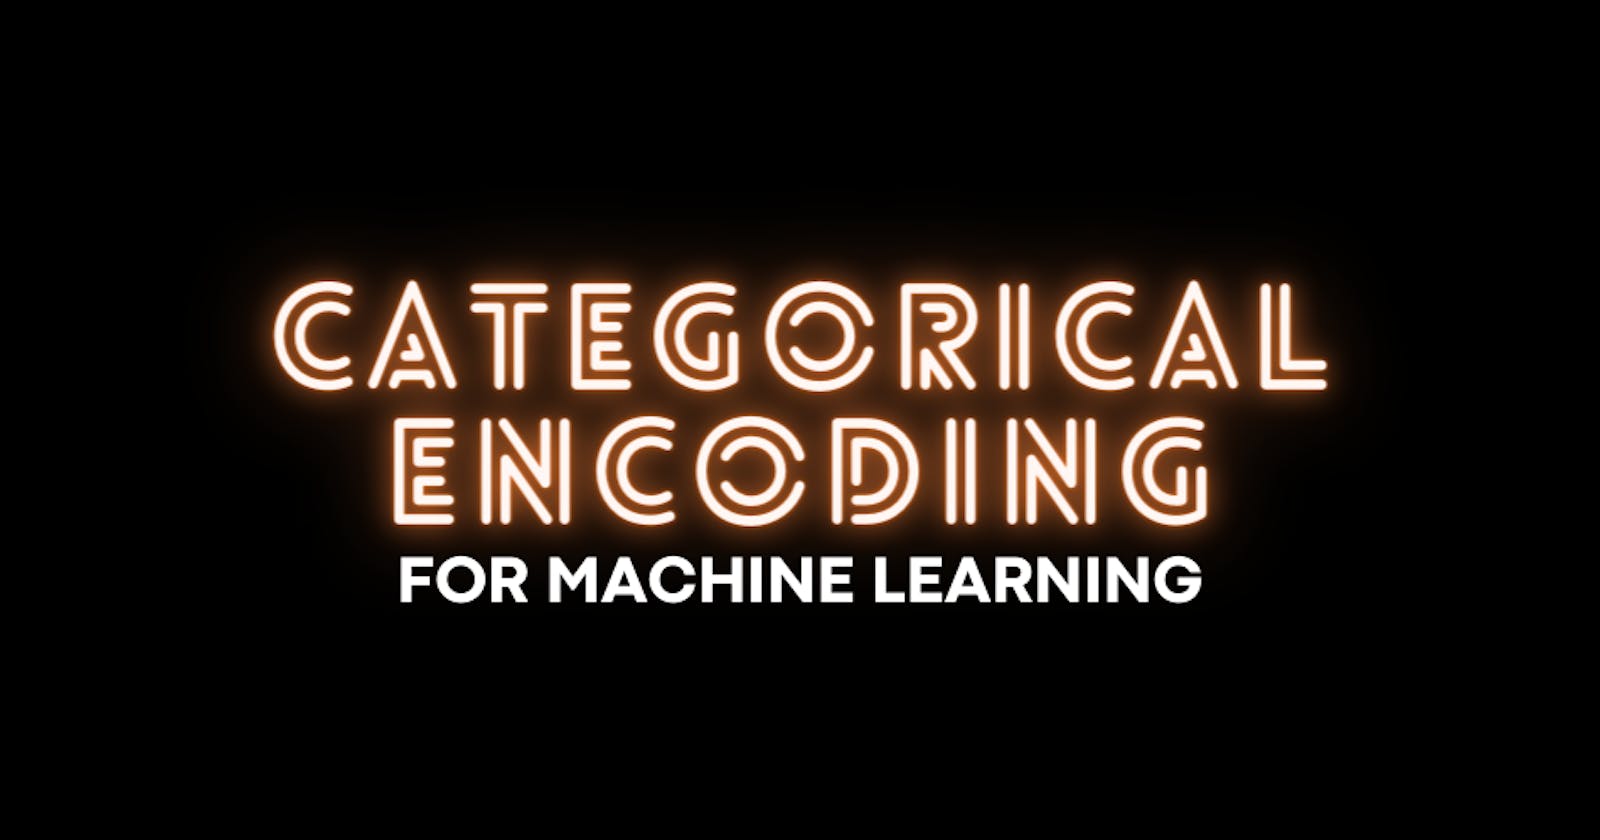 Categorical Encoding for Machine Learning